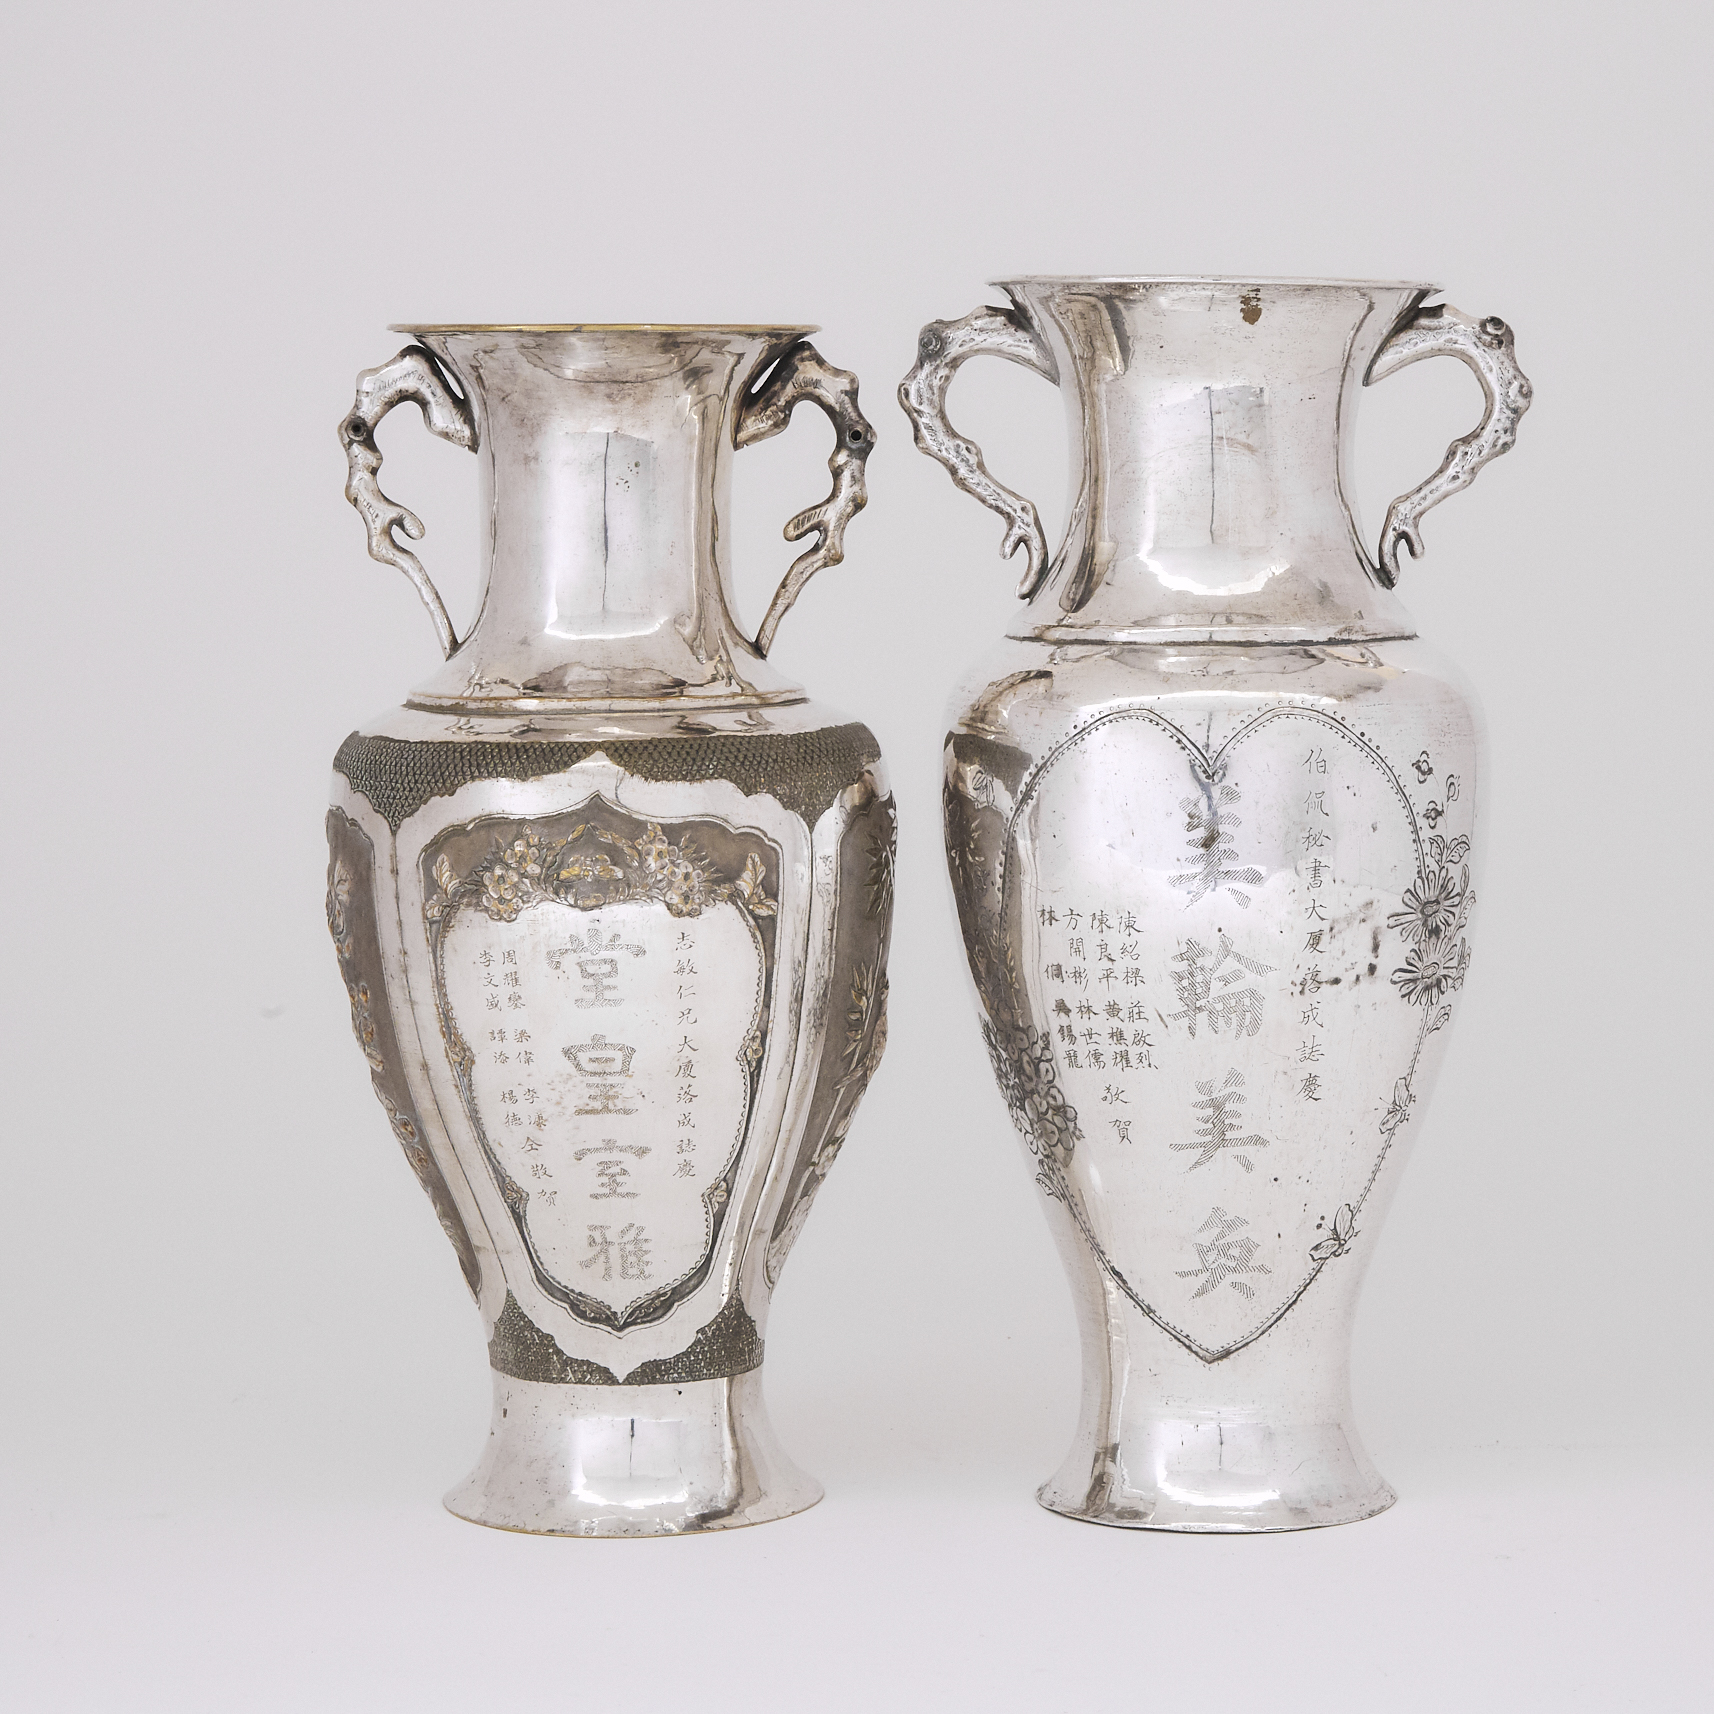 Two Chinese Export Silvered Vases, Late 19th/Early 20th Century